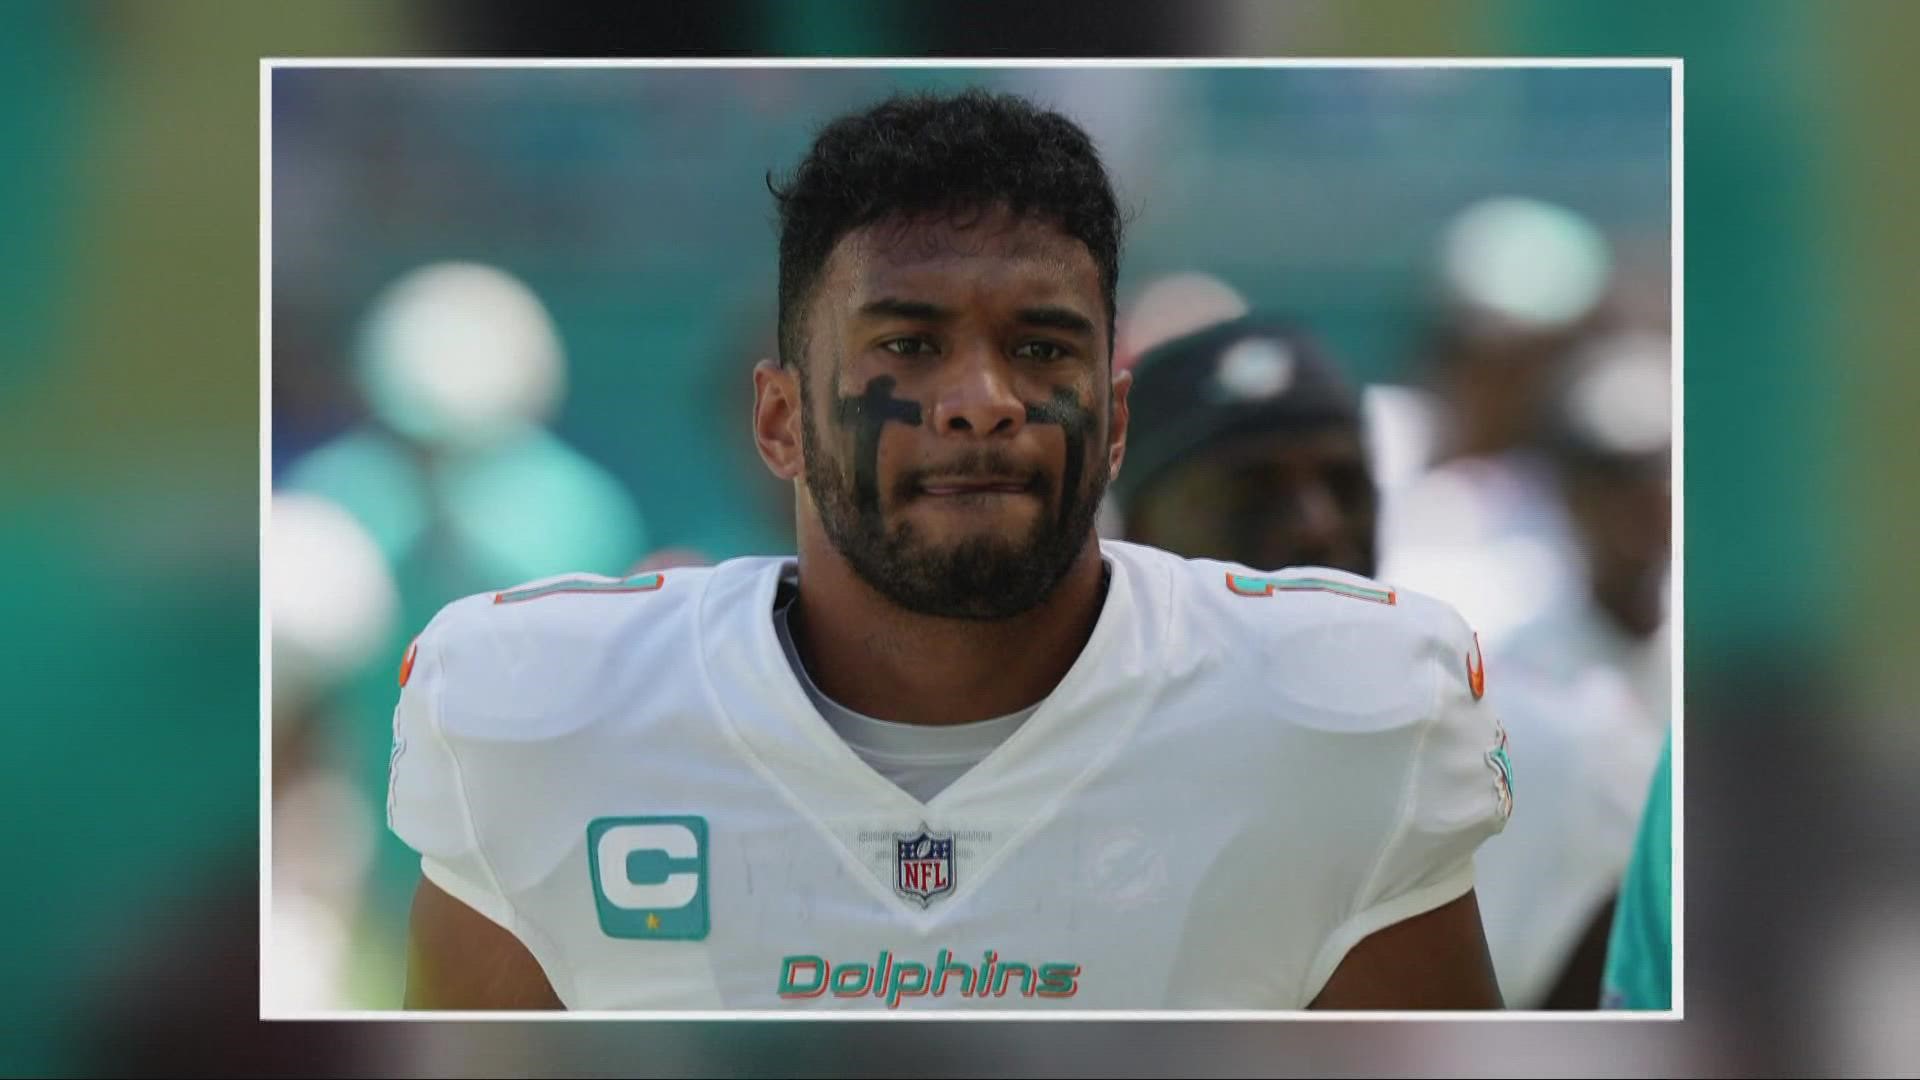 The Dolphins suffered a concussion after a violent in-game hit, just one week after wobbling off the field after his head struck the ground.